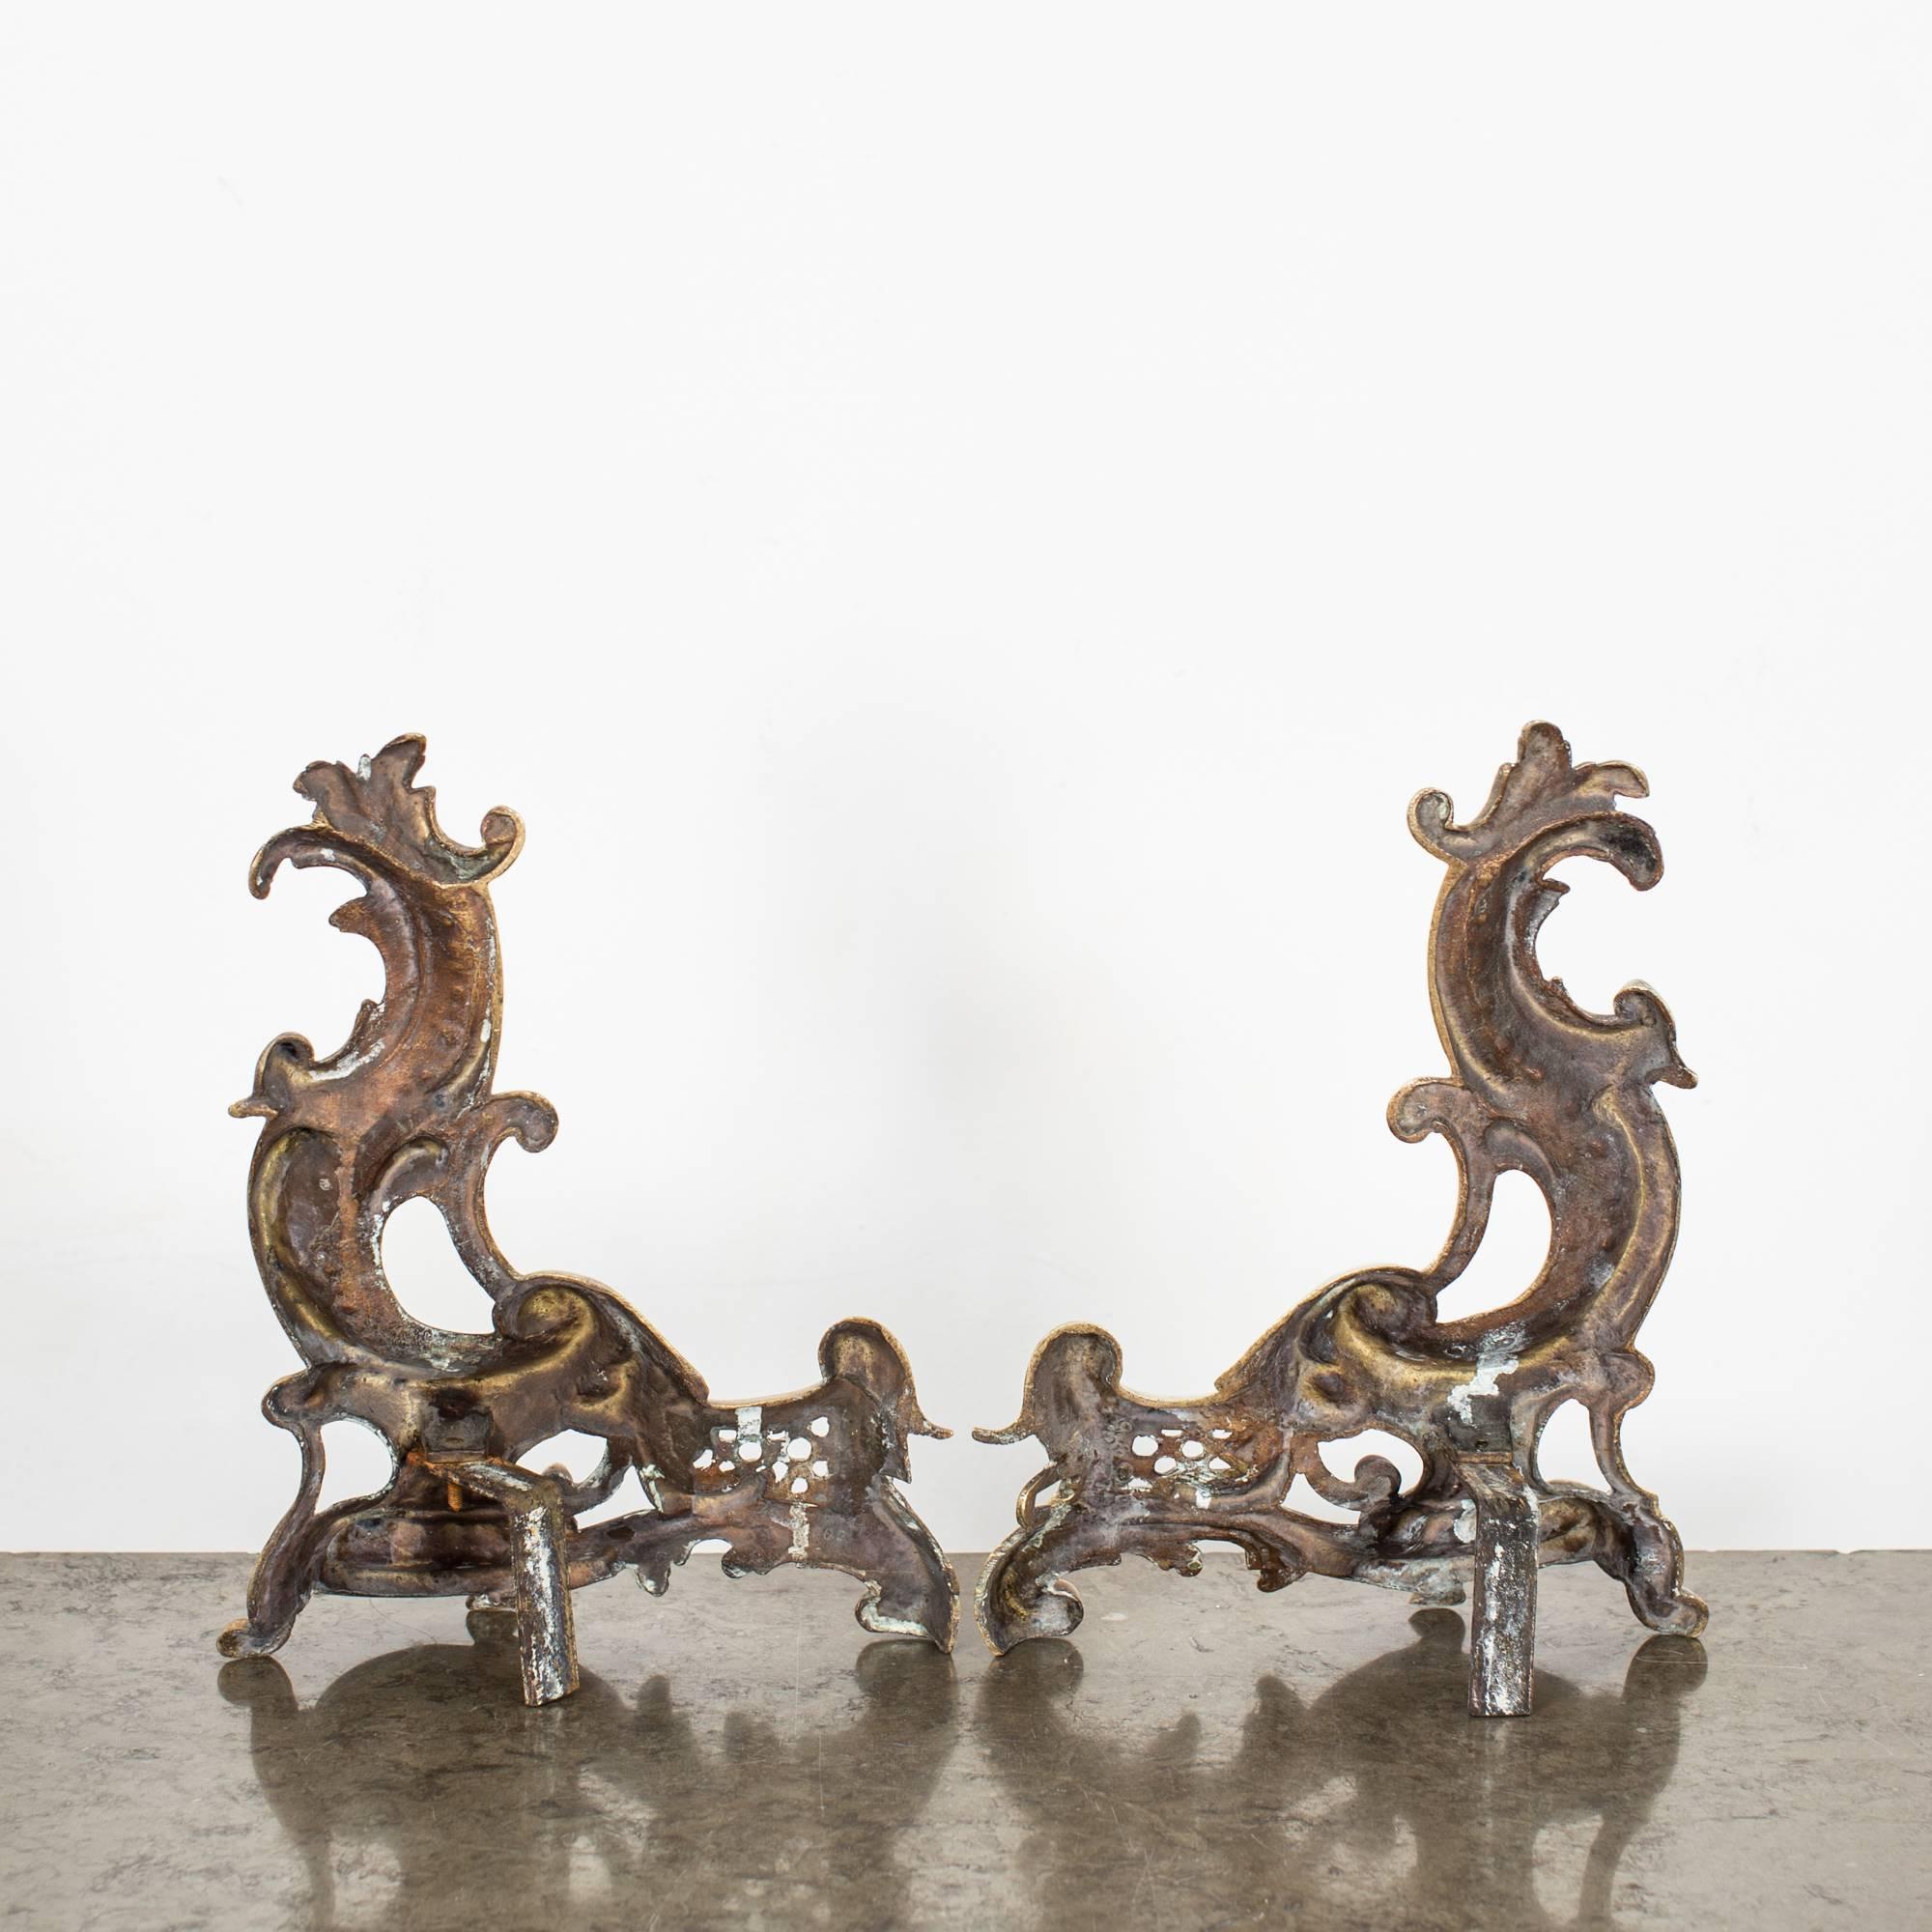 A pair of bookstands made in a Rococo style in Europe. Made of brass and shaped in C-curves and acanthus leaves.